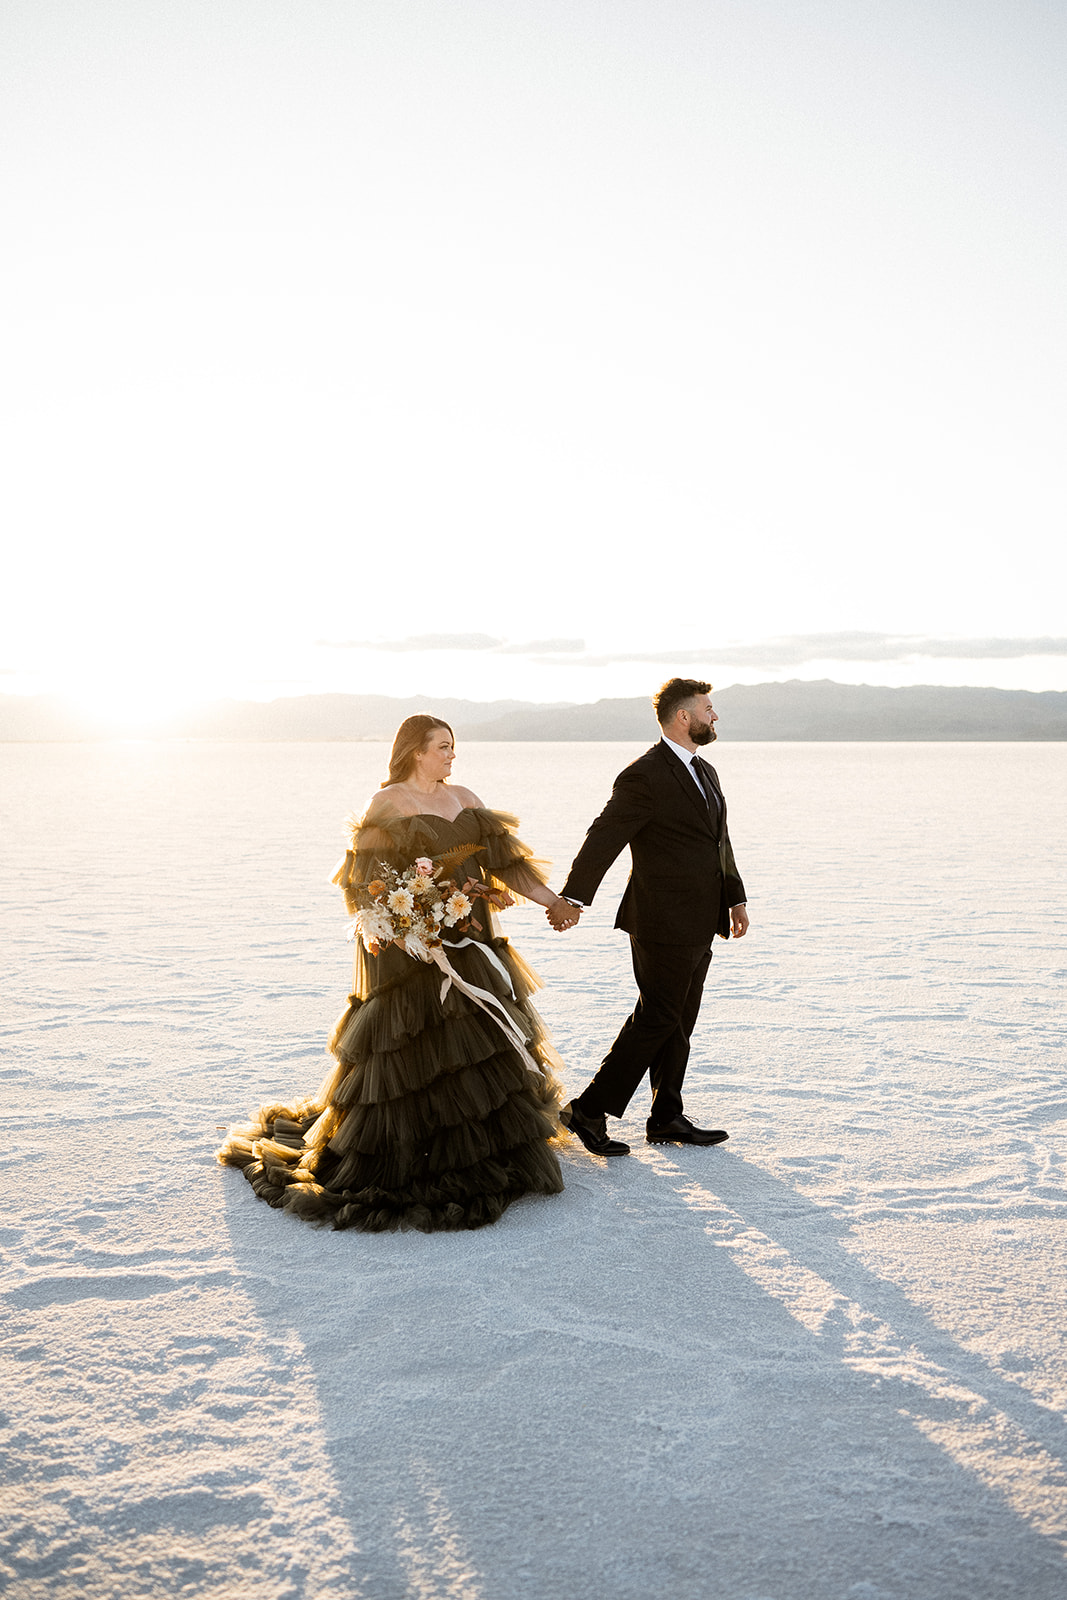 Couple walking hand in hand at sunset on the Salt Flats, casting long shadows, in formal attire